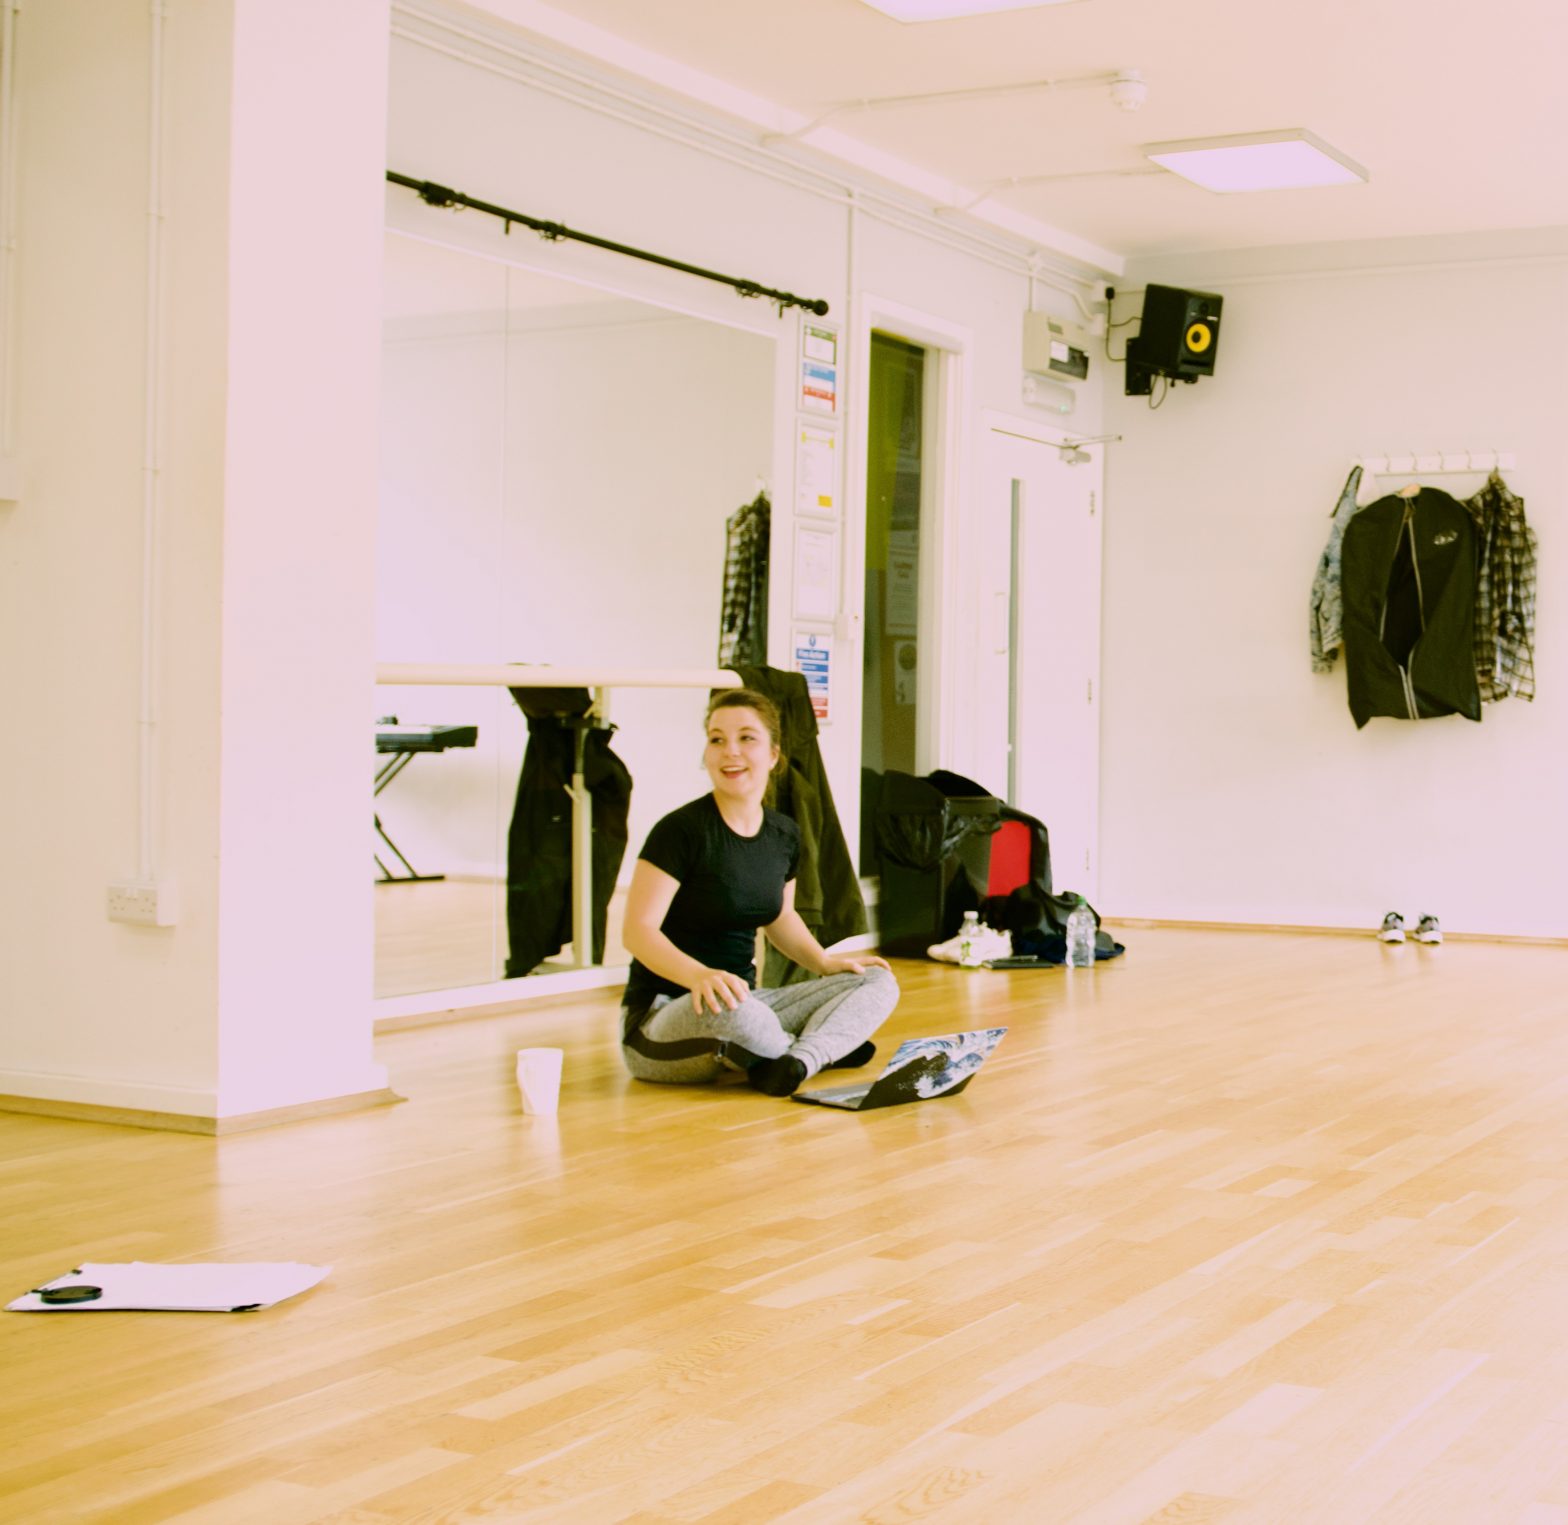 A woman is sat in a dance studio. She has her hair back is is wearing a dark top and grey trousers.